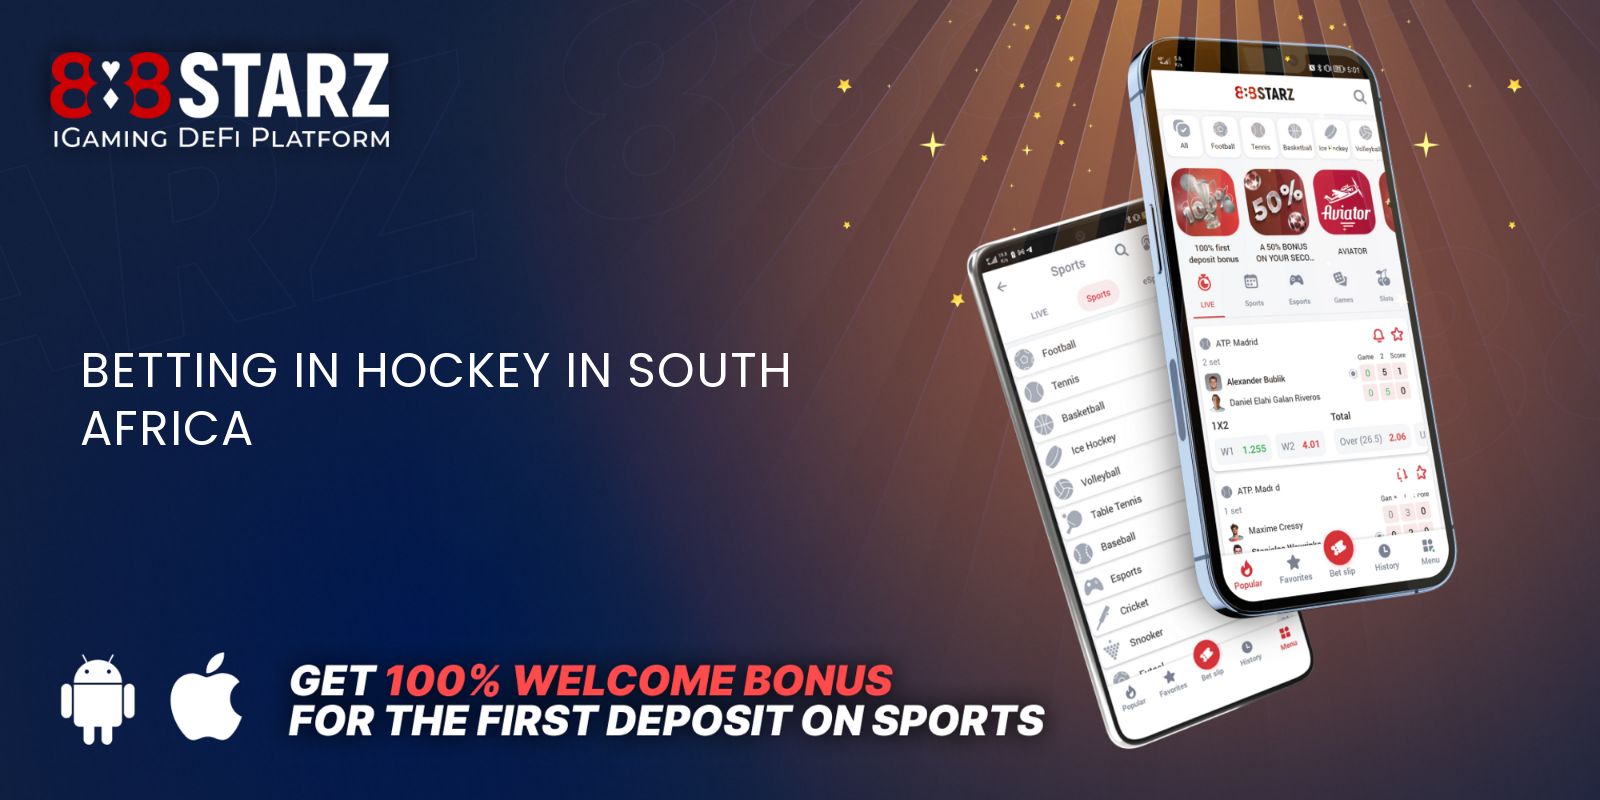 Betting in hockey in South Africa